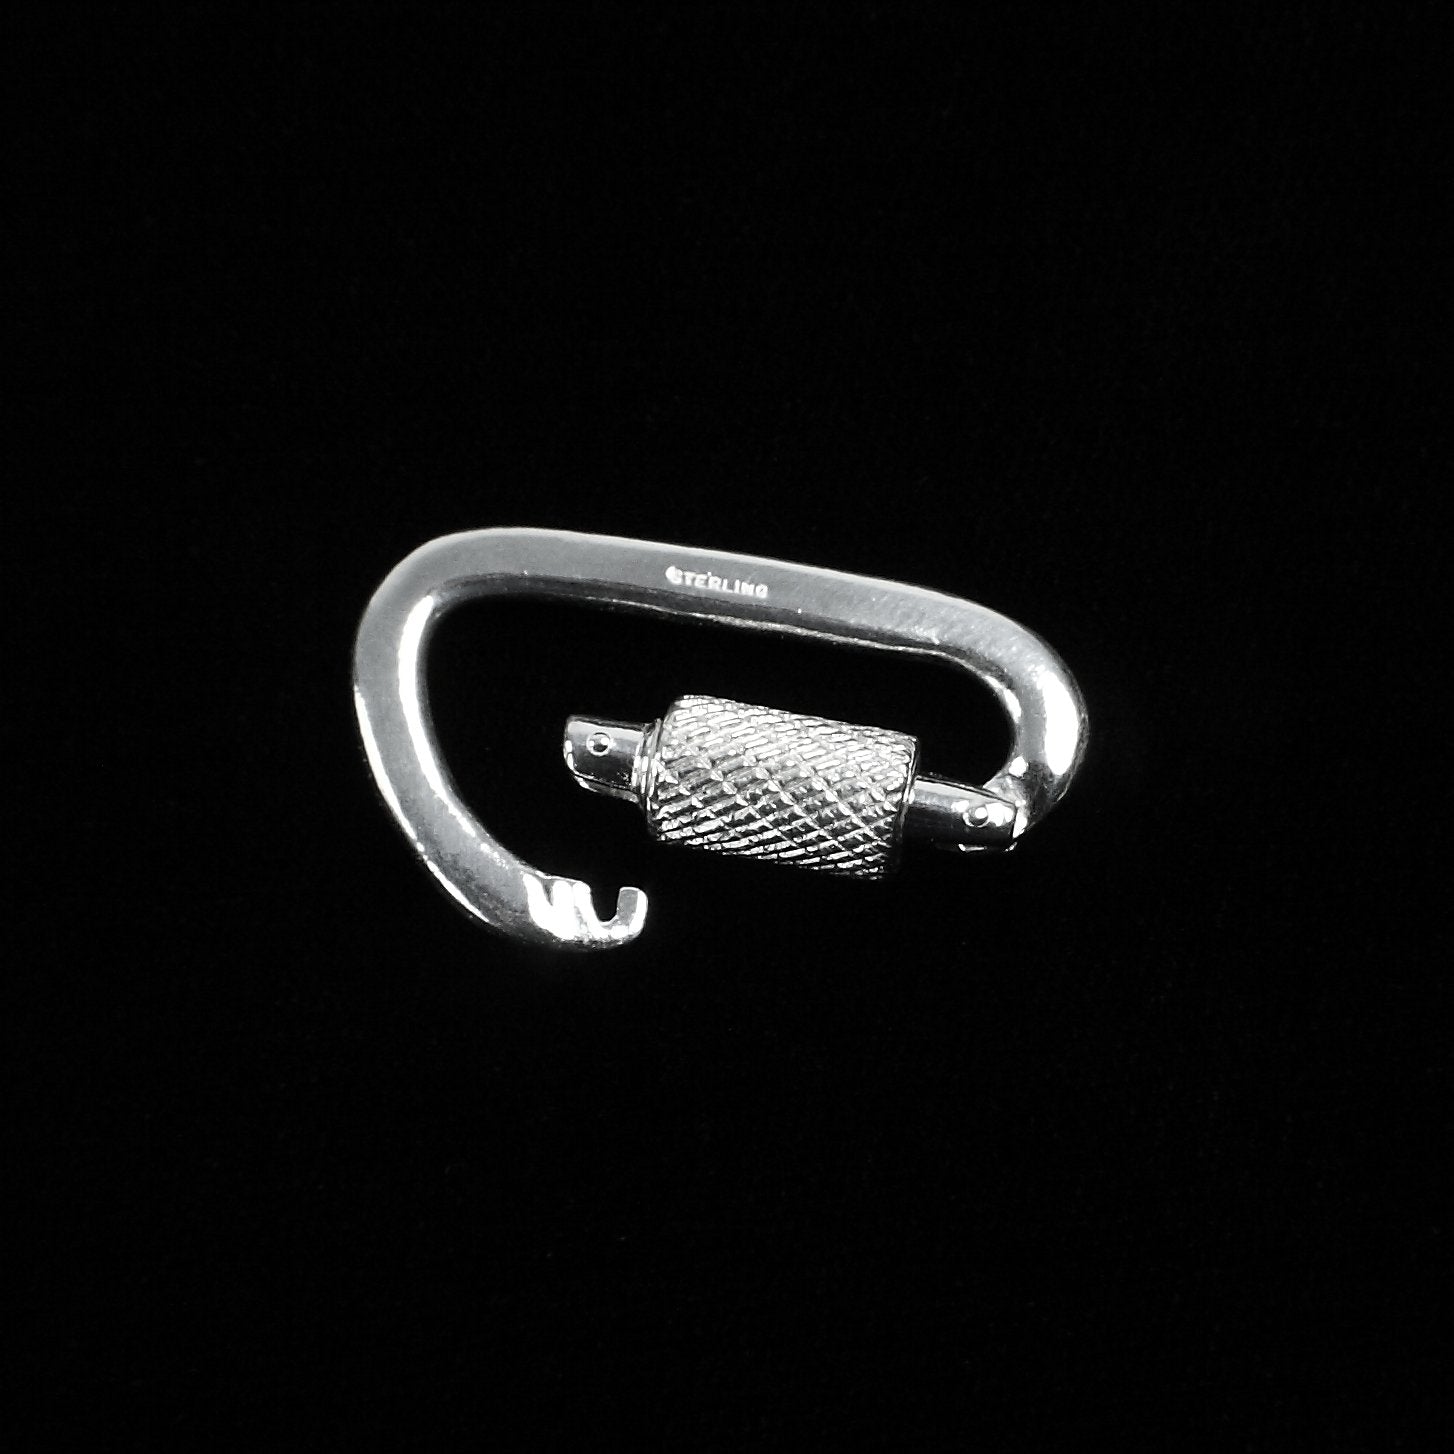 Functional 1.25 inch Carabiner Clasp - Handmade in sterling silver - Shown Open in position